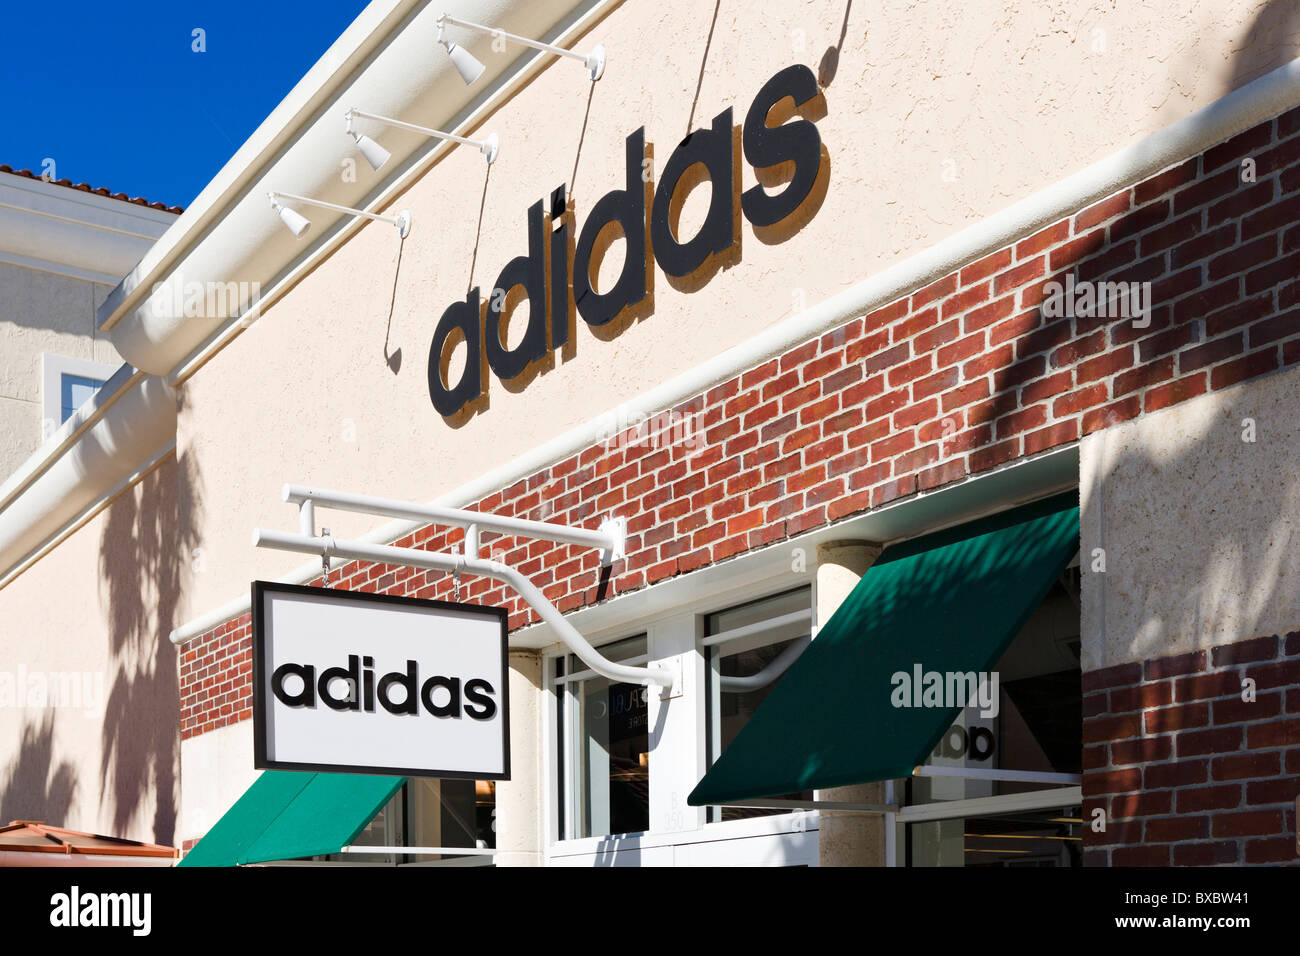 adidas outlet text